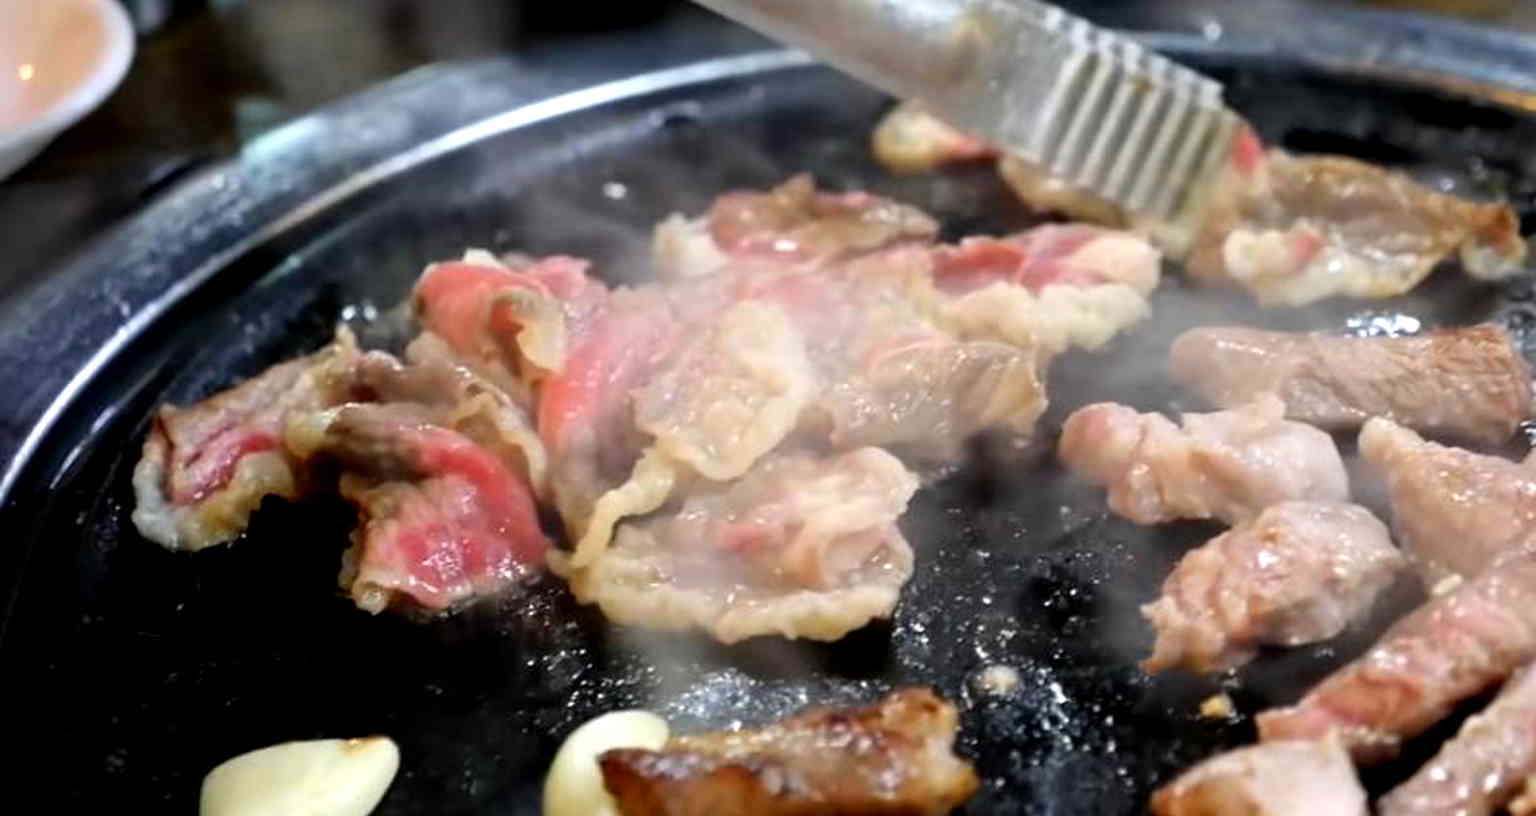 Los Angeles’ ban on gas stoves could spell the end for many Korean BBQ, Chinese restaurants